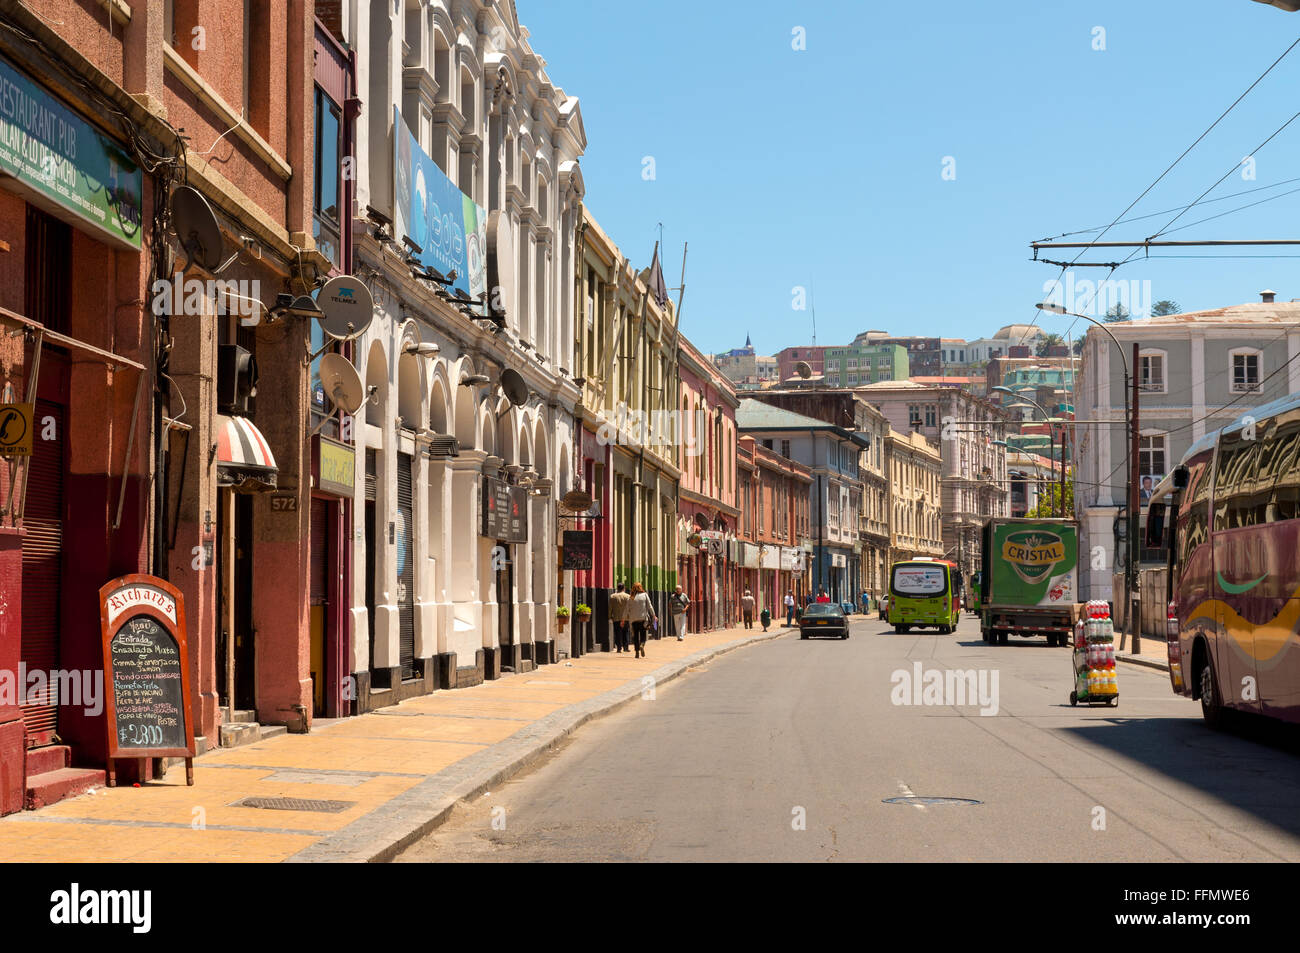 Old fashioned authentic buildings and street of Valparaiso, Chile Stock Photo